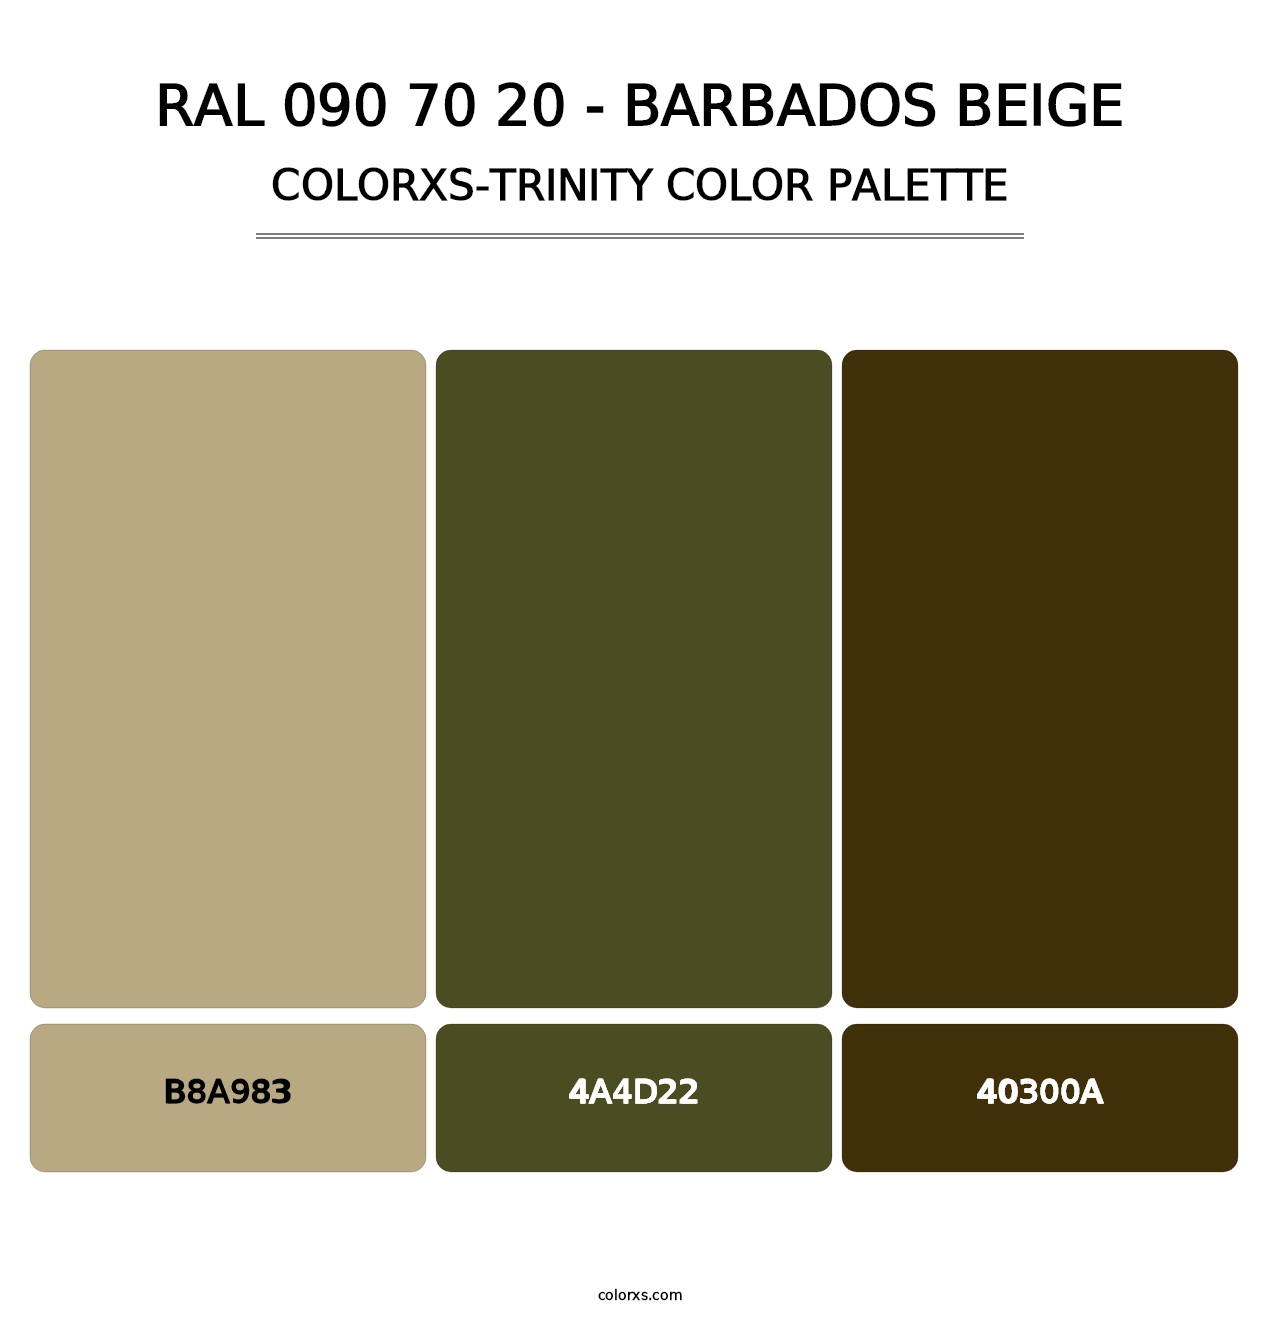 RAL 090 70 20 - Barbados Beige - Colorxs Trinity Palette